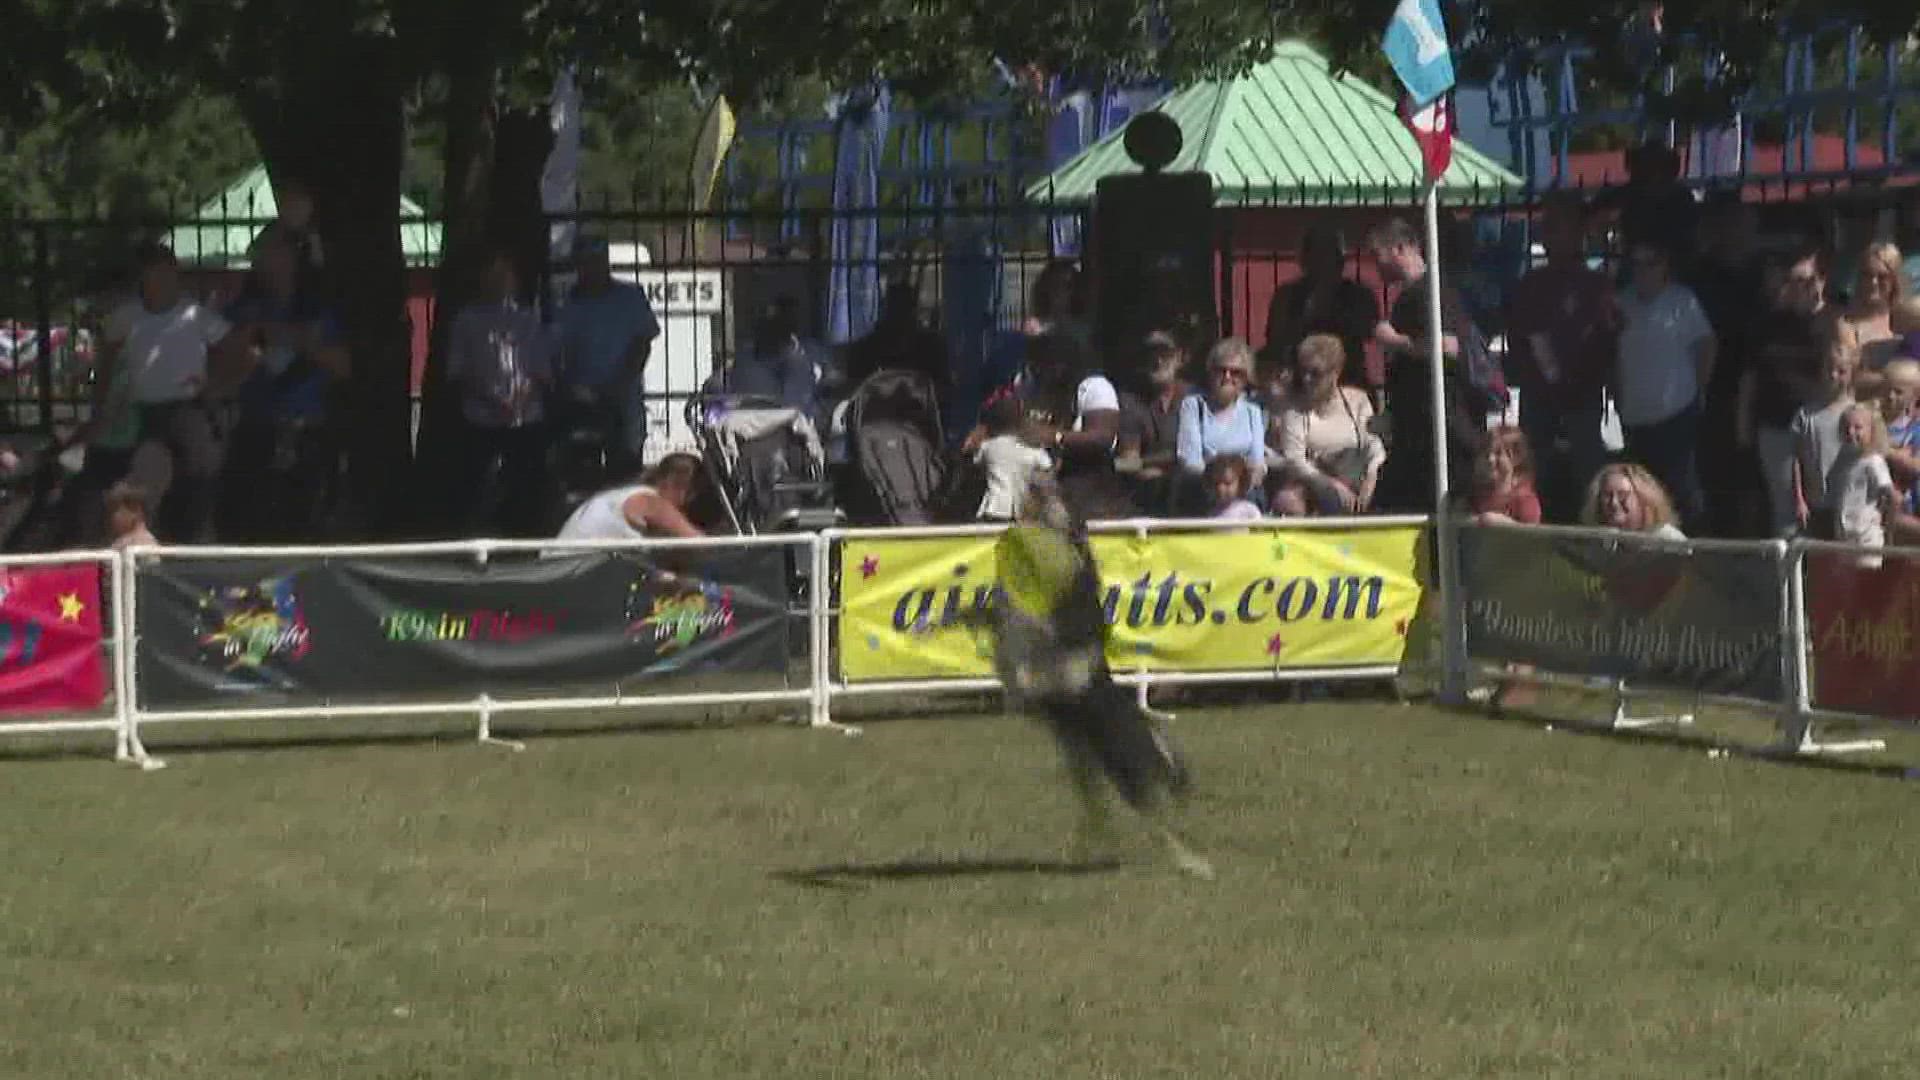 The show is a mashup between a circus act and a frisbee contest, featuring dazzling doggies.